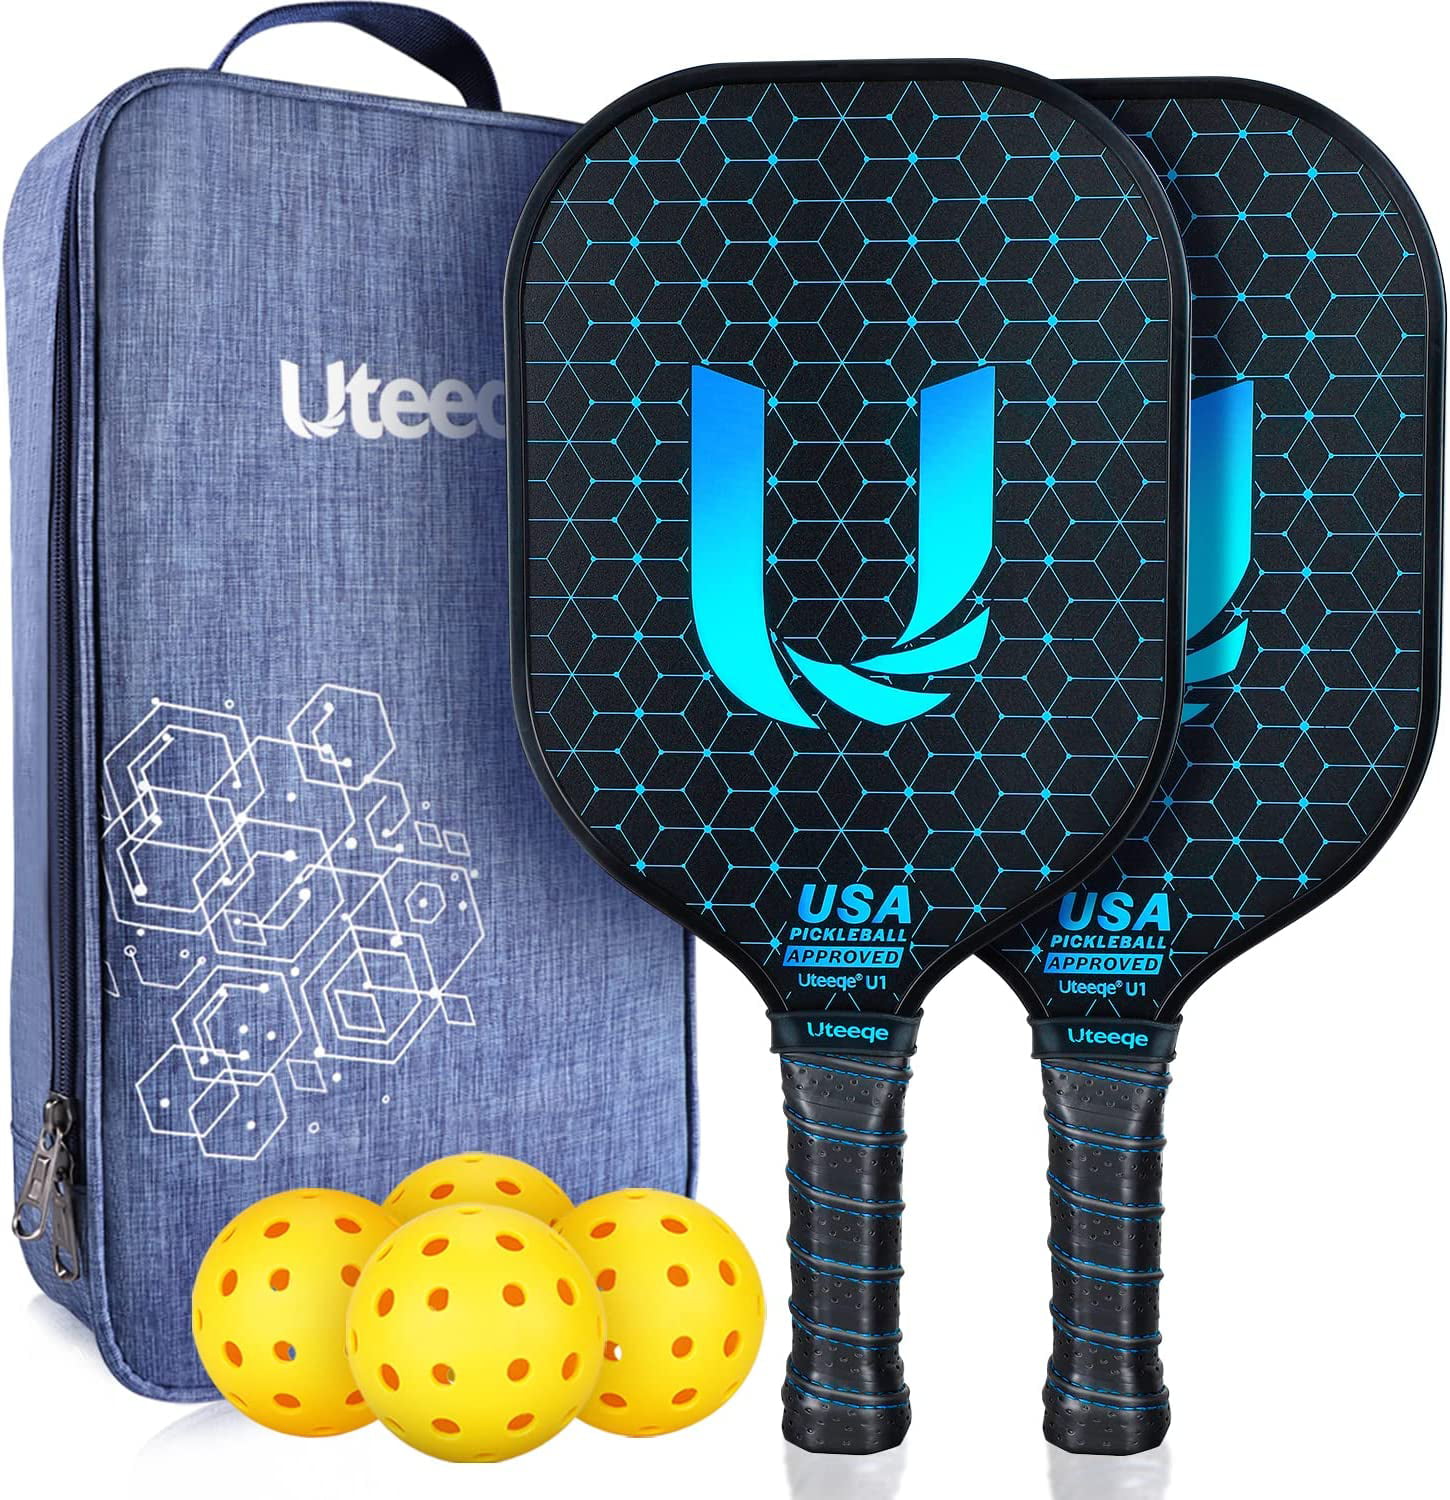 Pickle Ball Equipment for Beginners and Pros Pickleball Raquet Balls Grip and Travel Bag Indoor Outdoor Pickleball Paddle with 4 Balls Set of 2 Paddles USAPA Certified Graphite Pickleball Paddles 